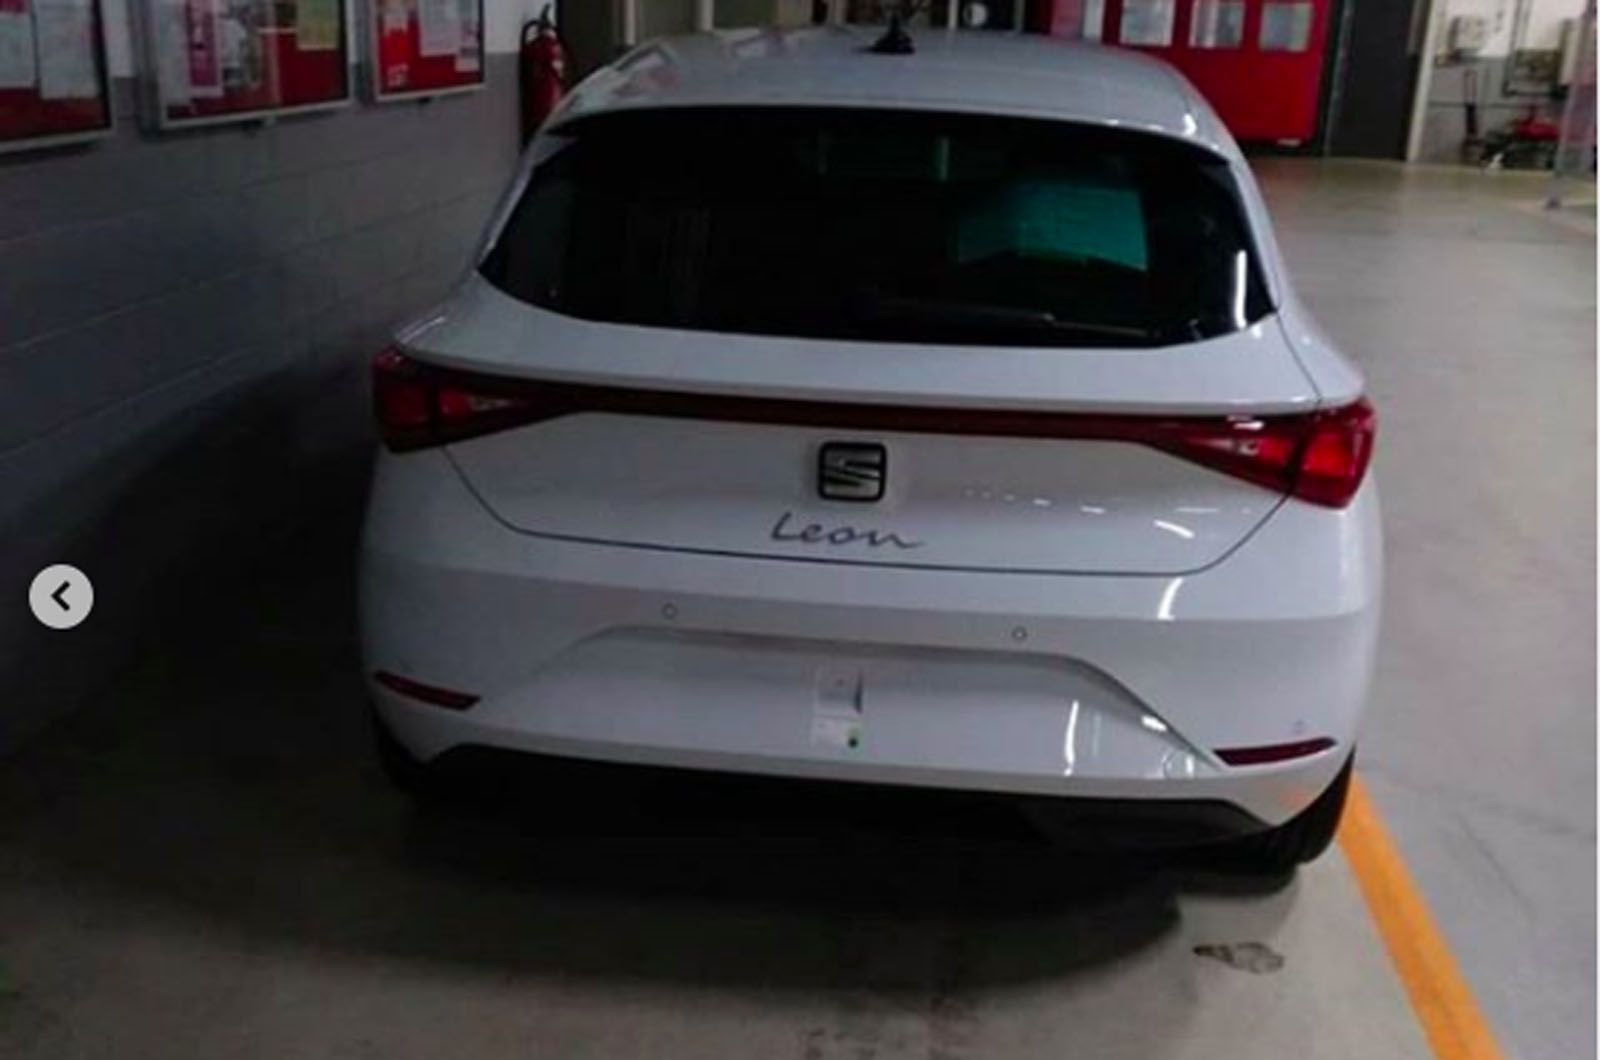 New 2020 Seat Leon leaked online ahead of unveiling